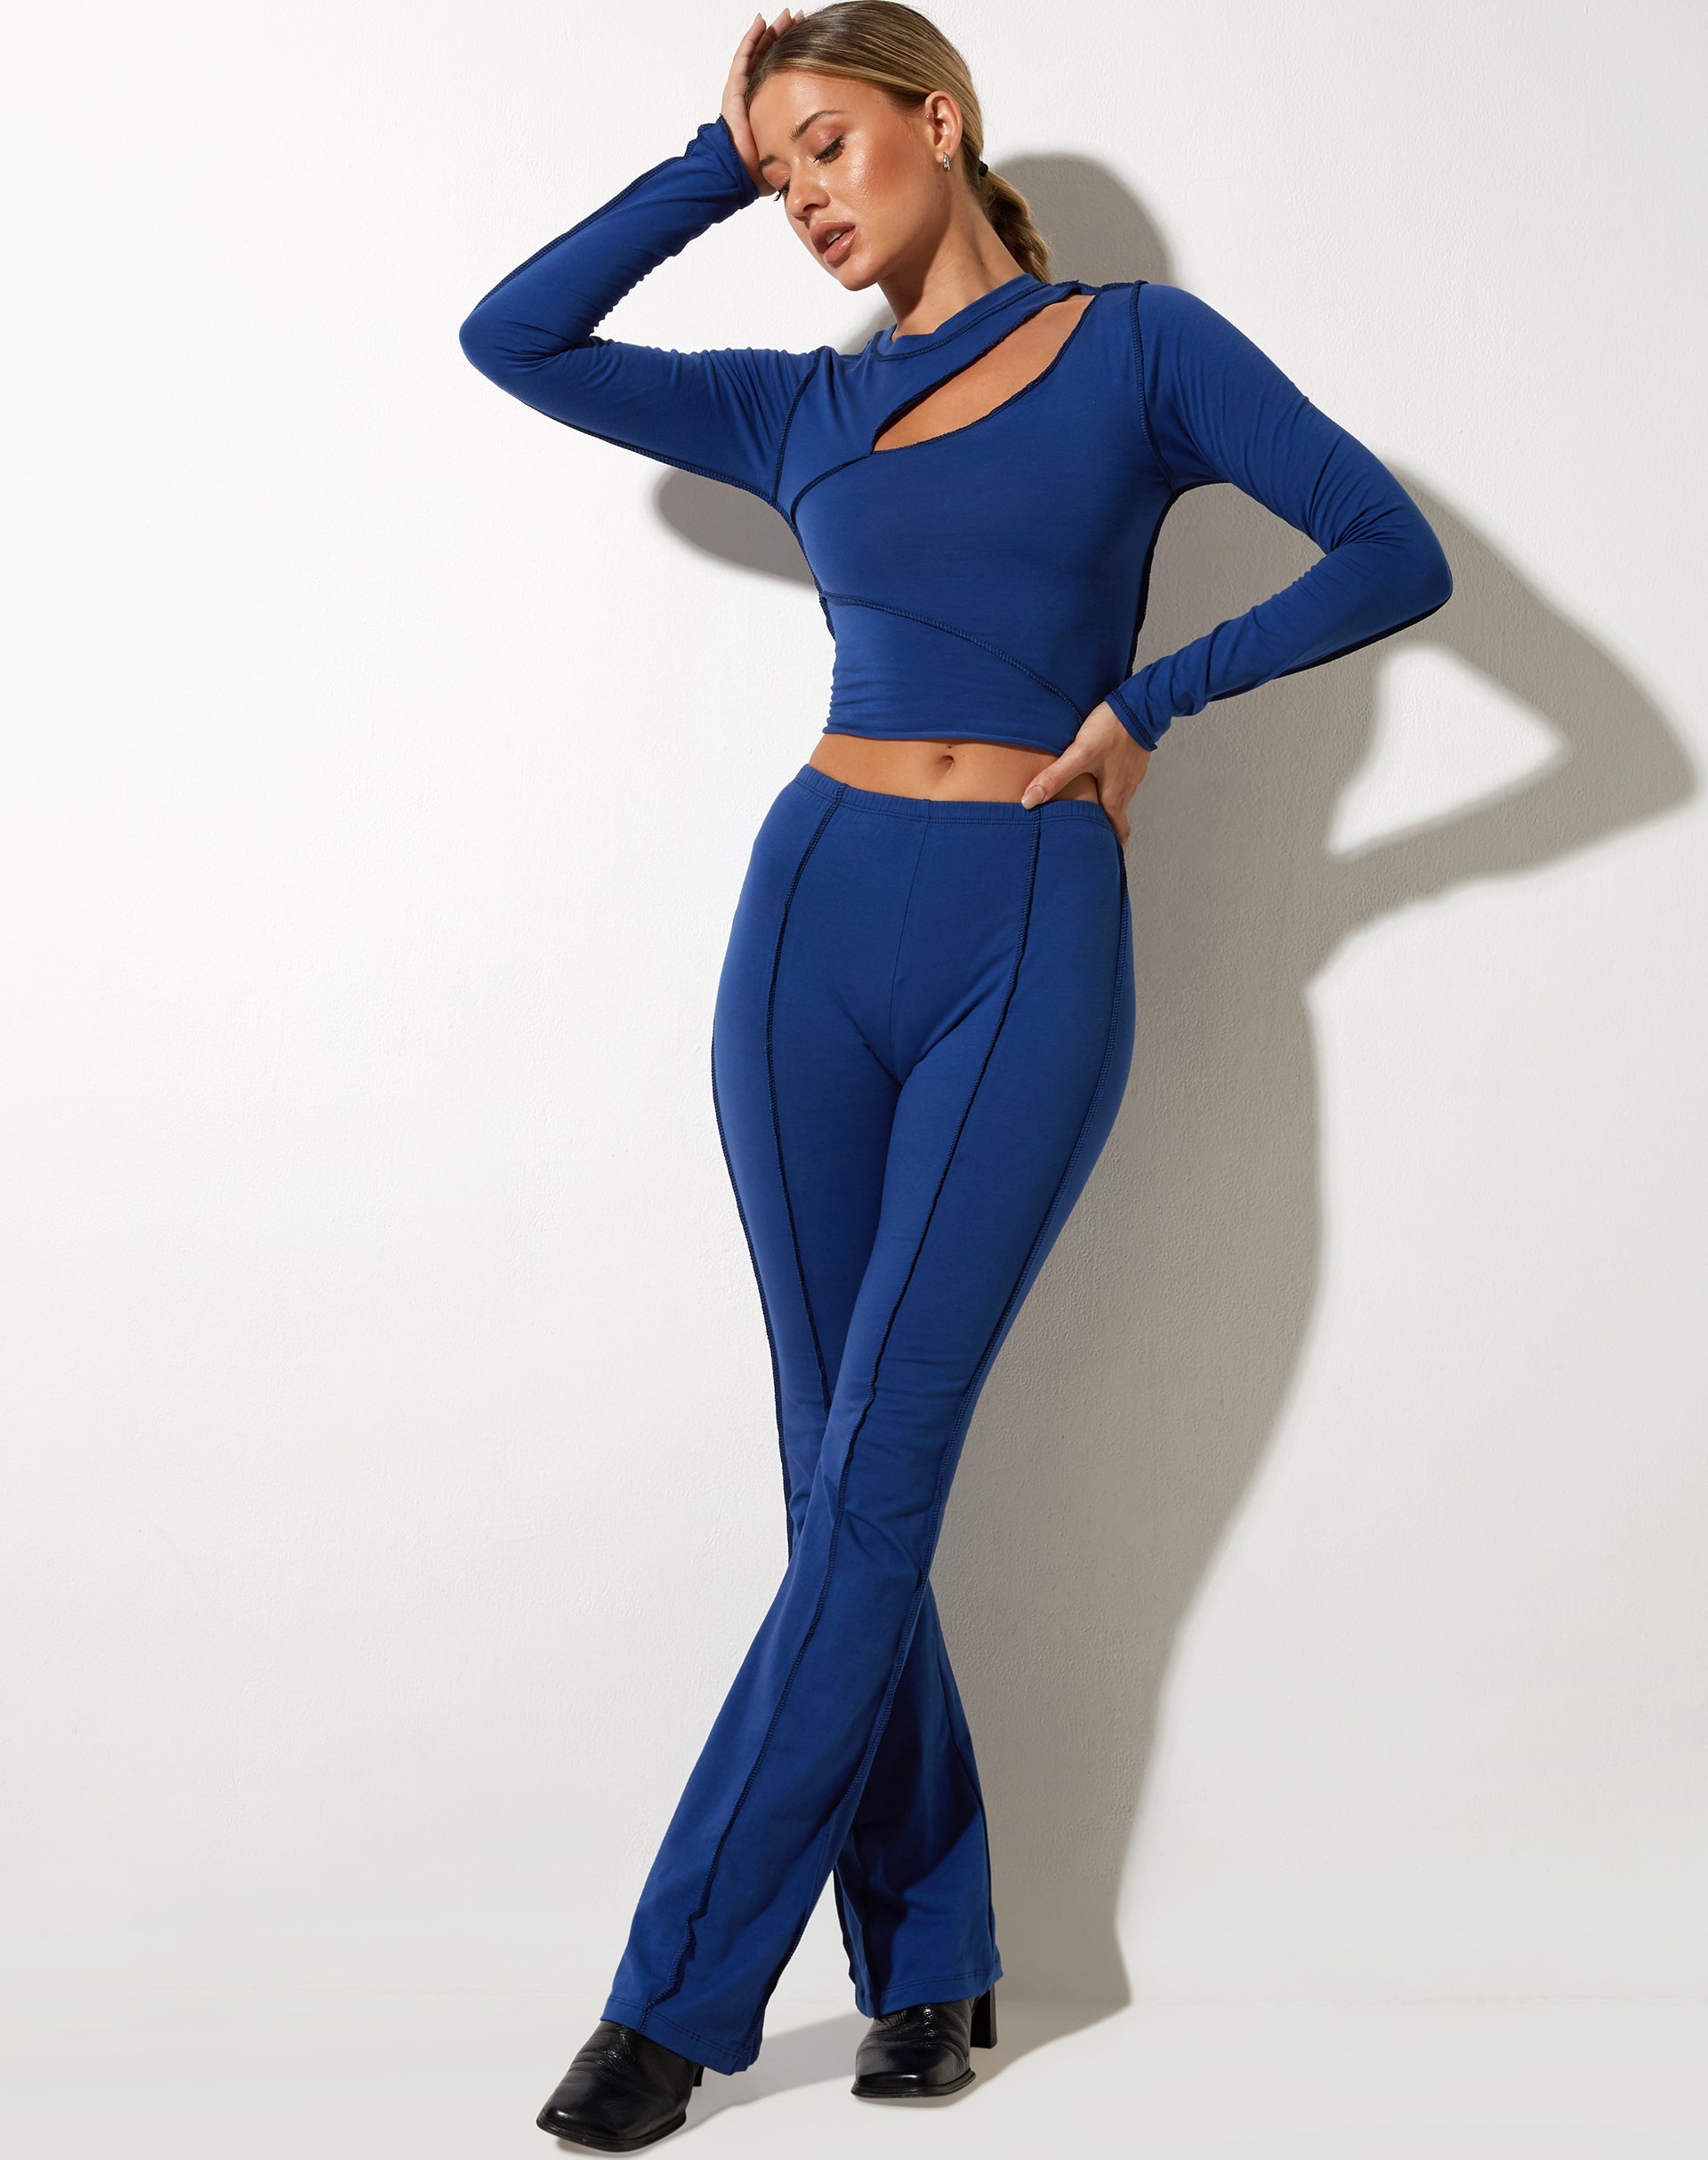 image of Tais Flared Trouser in Lycra Dazzling Blue